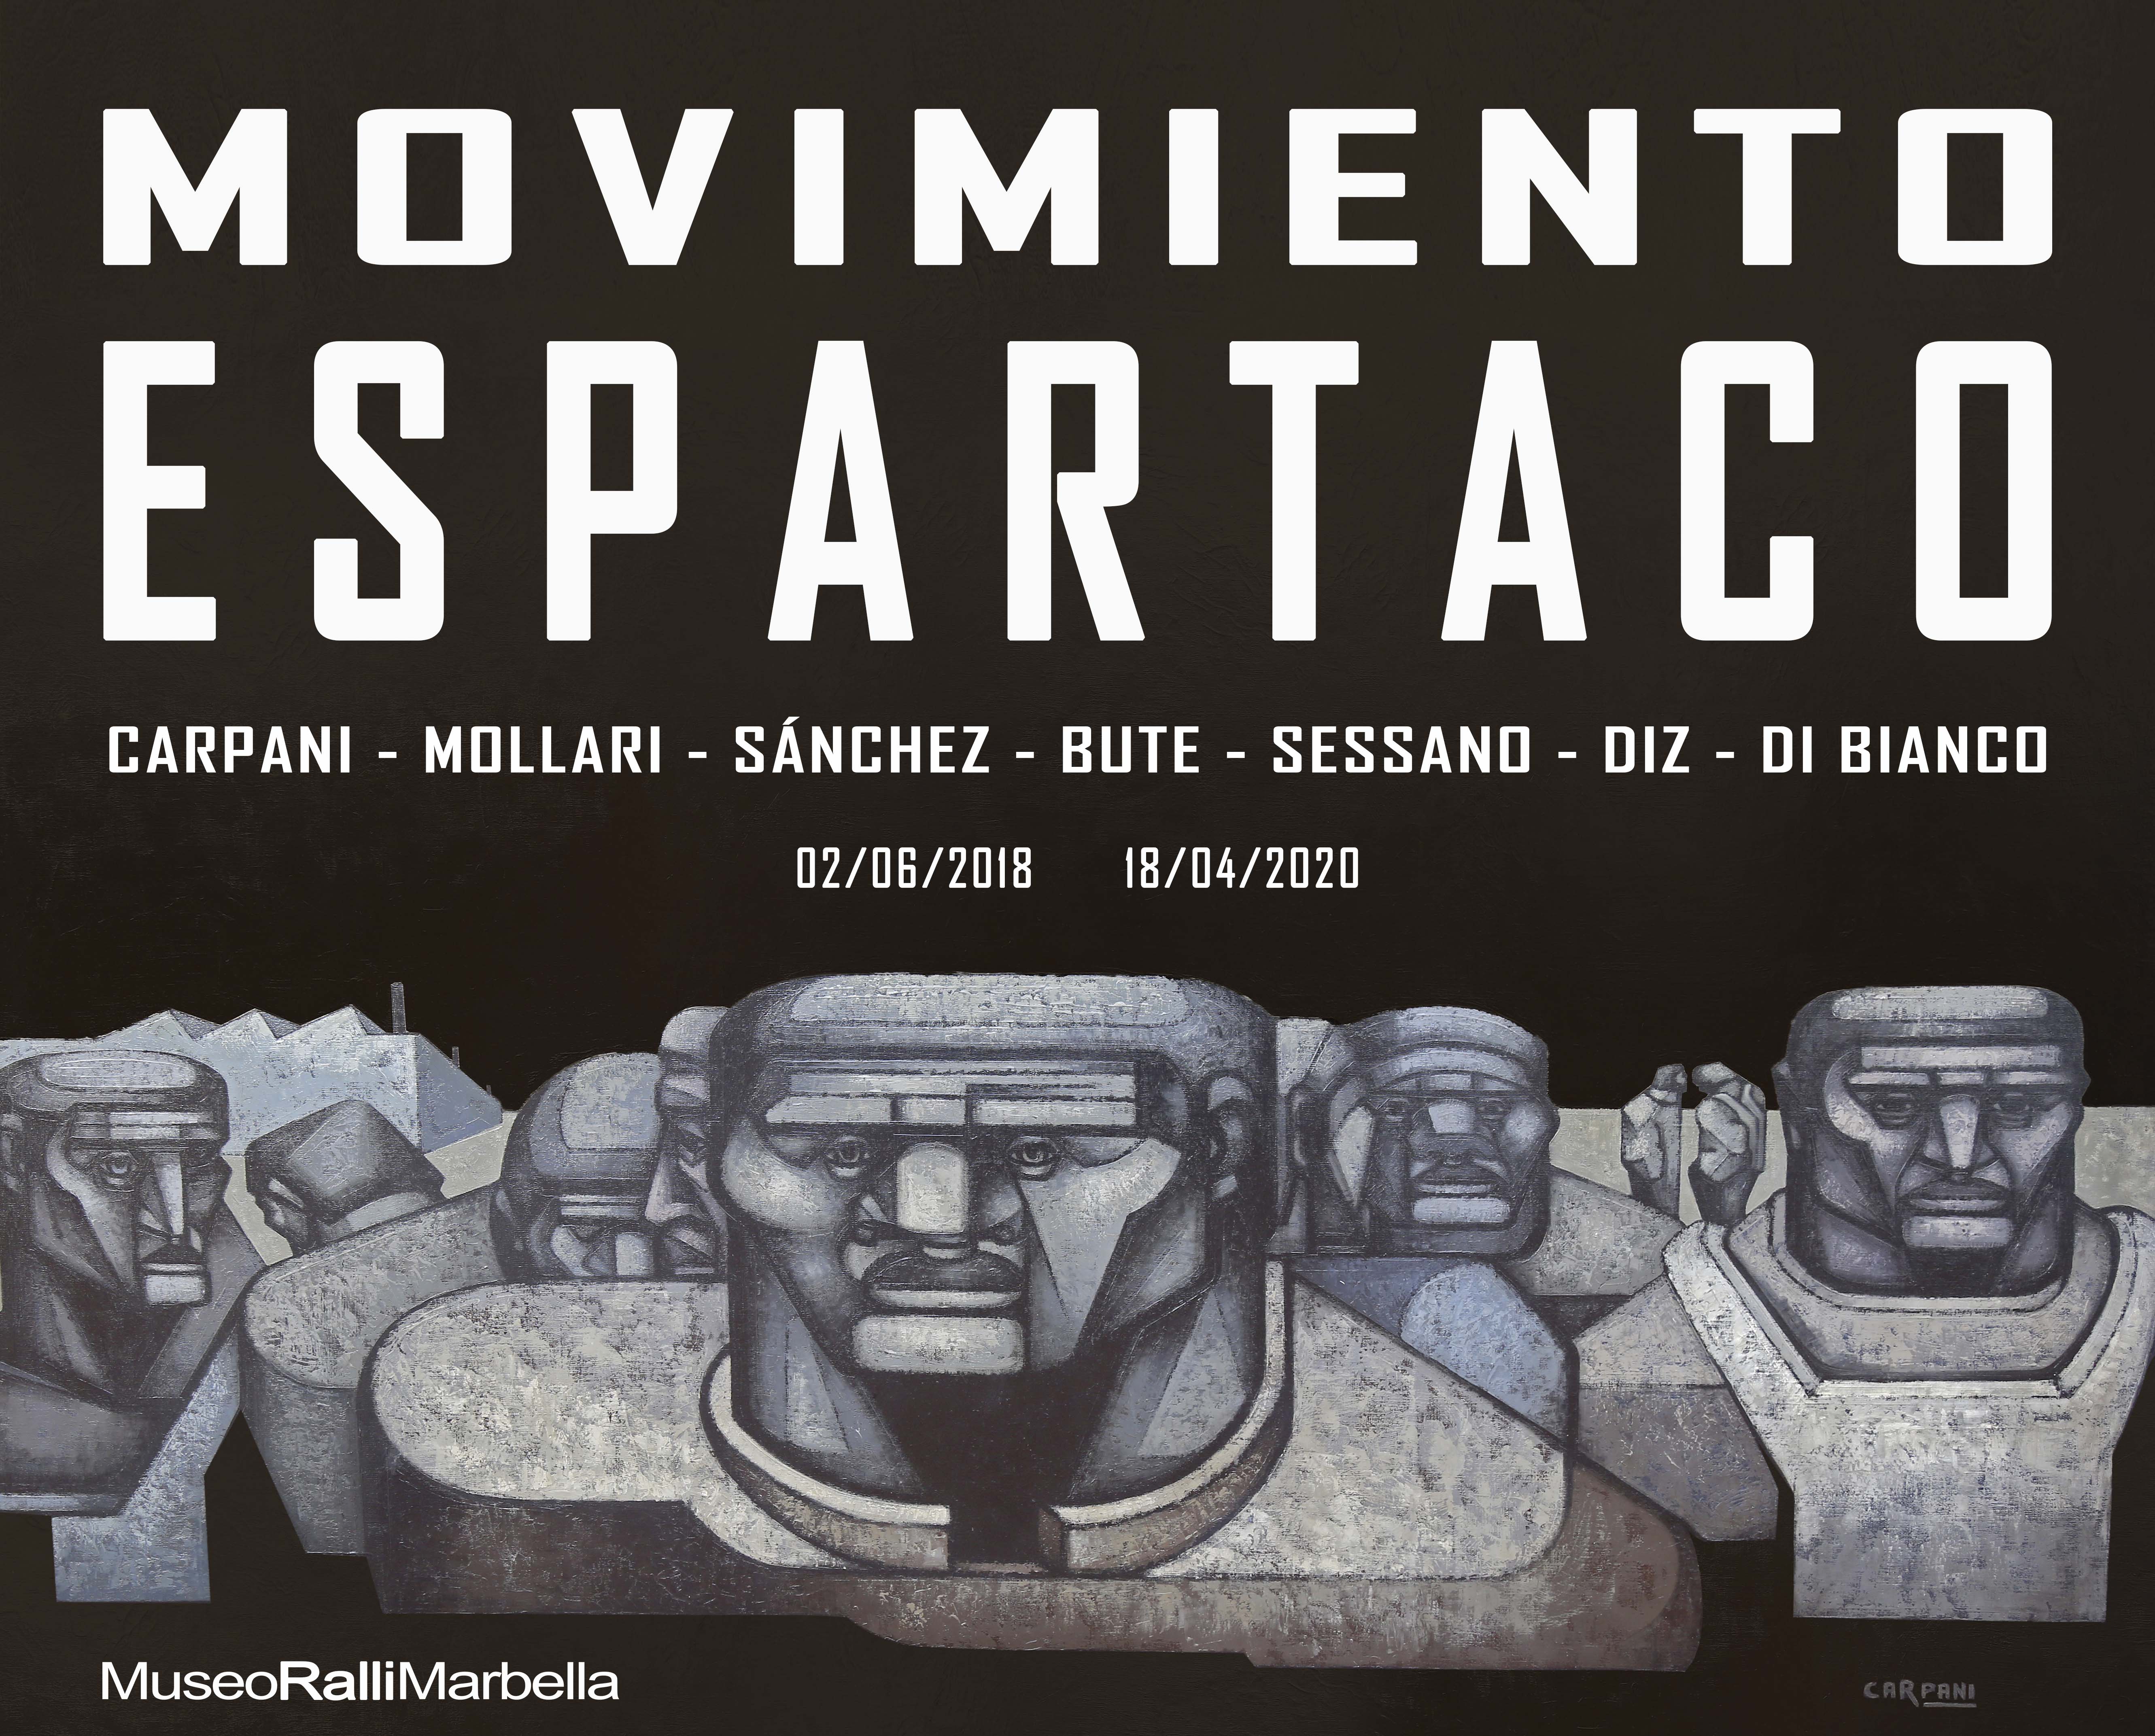 Invitation to an exhibition of paintings about the Spartacus movement